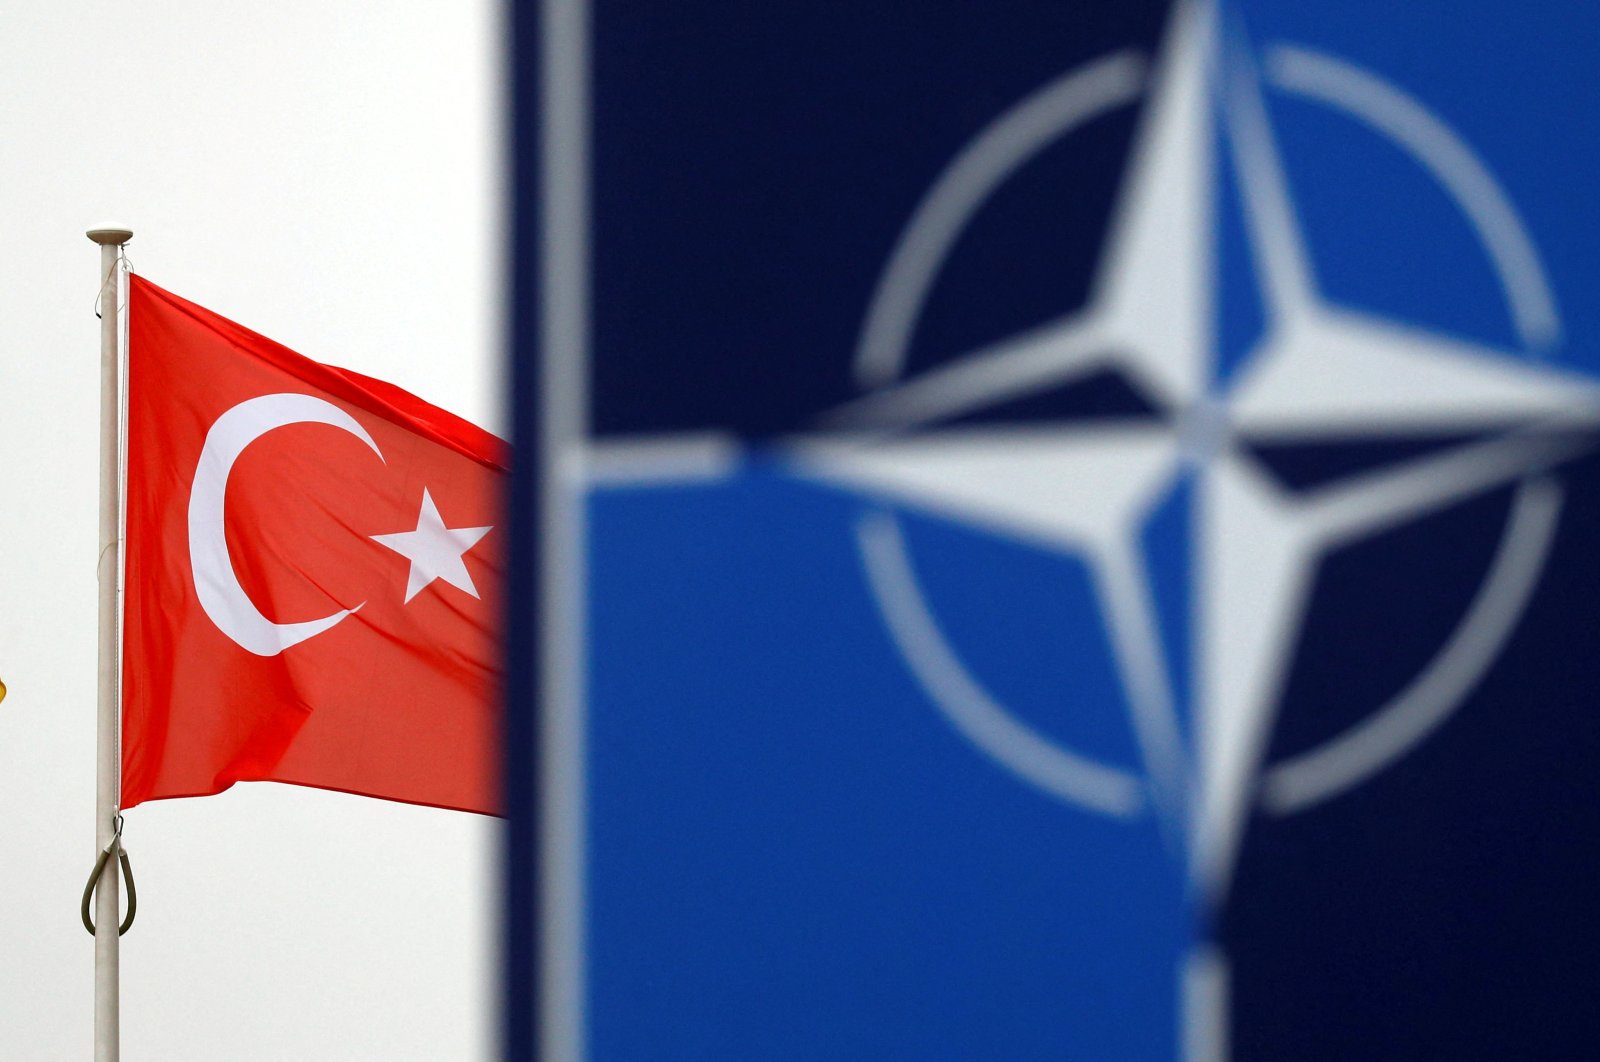 A Turkish flag flies next to a NATO logo at the Alliance headquarters in Brussels, Belgium, Nov. 26, 2019. (Reuters Photo)